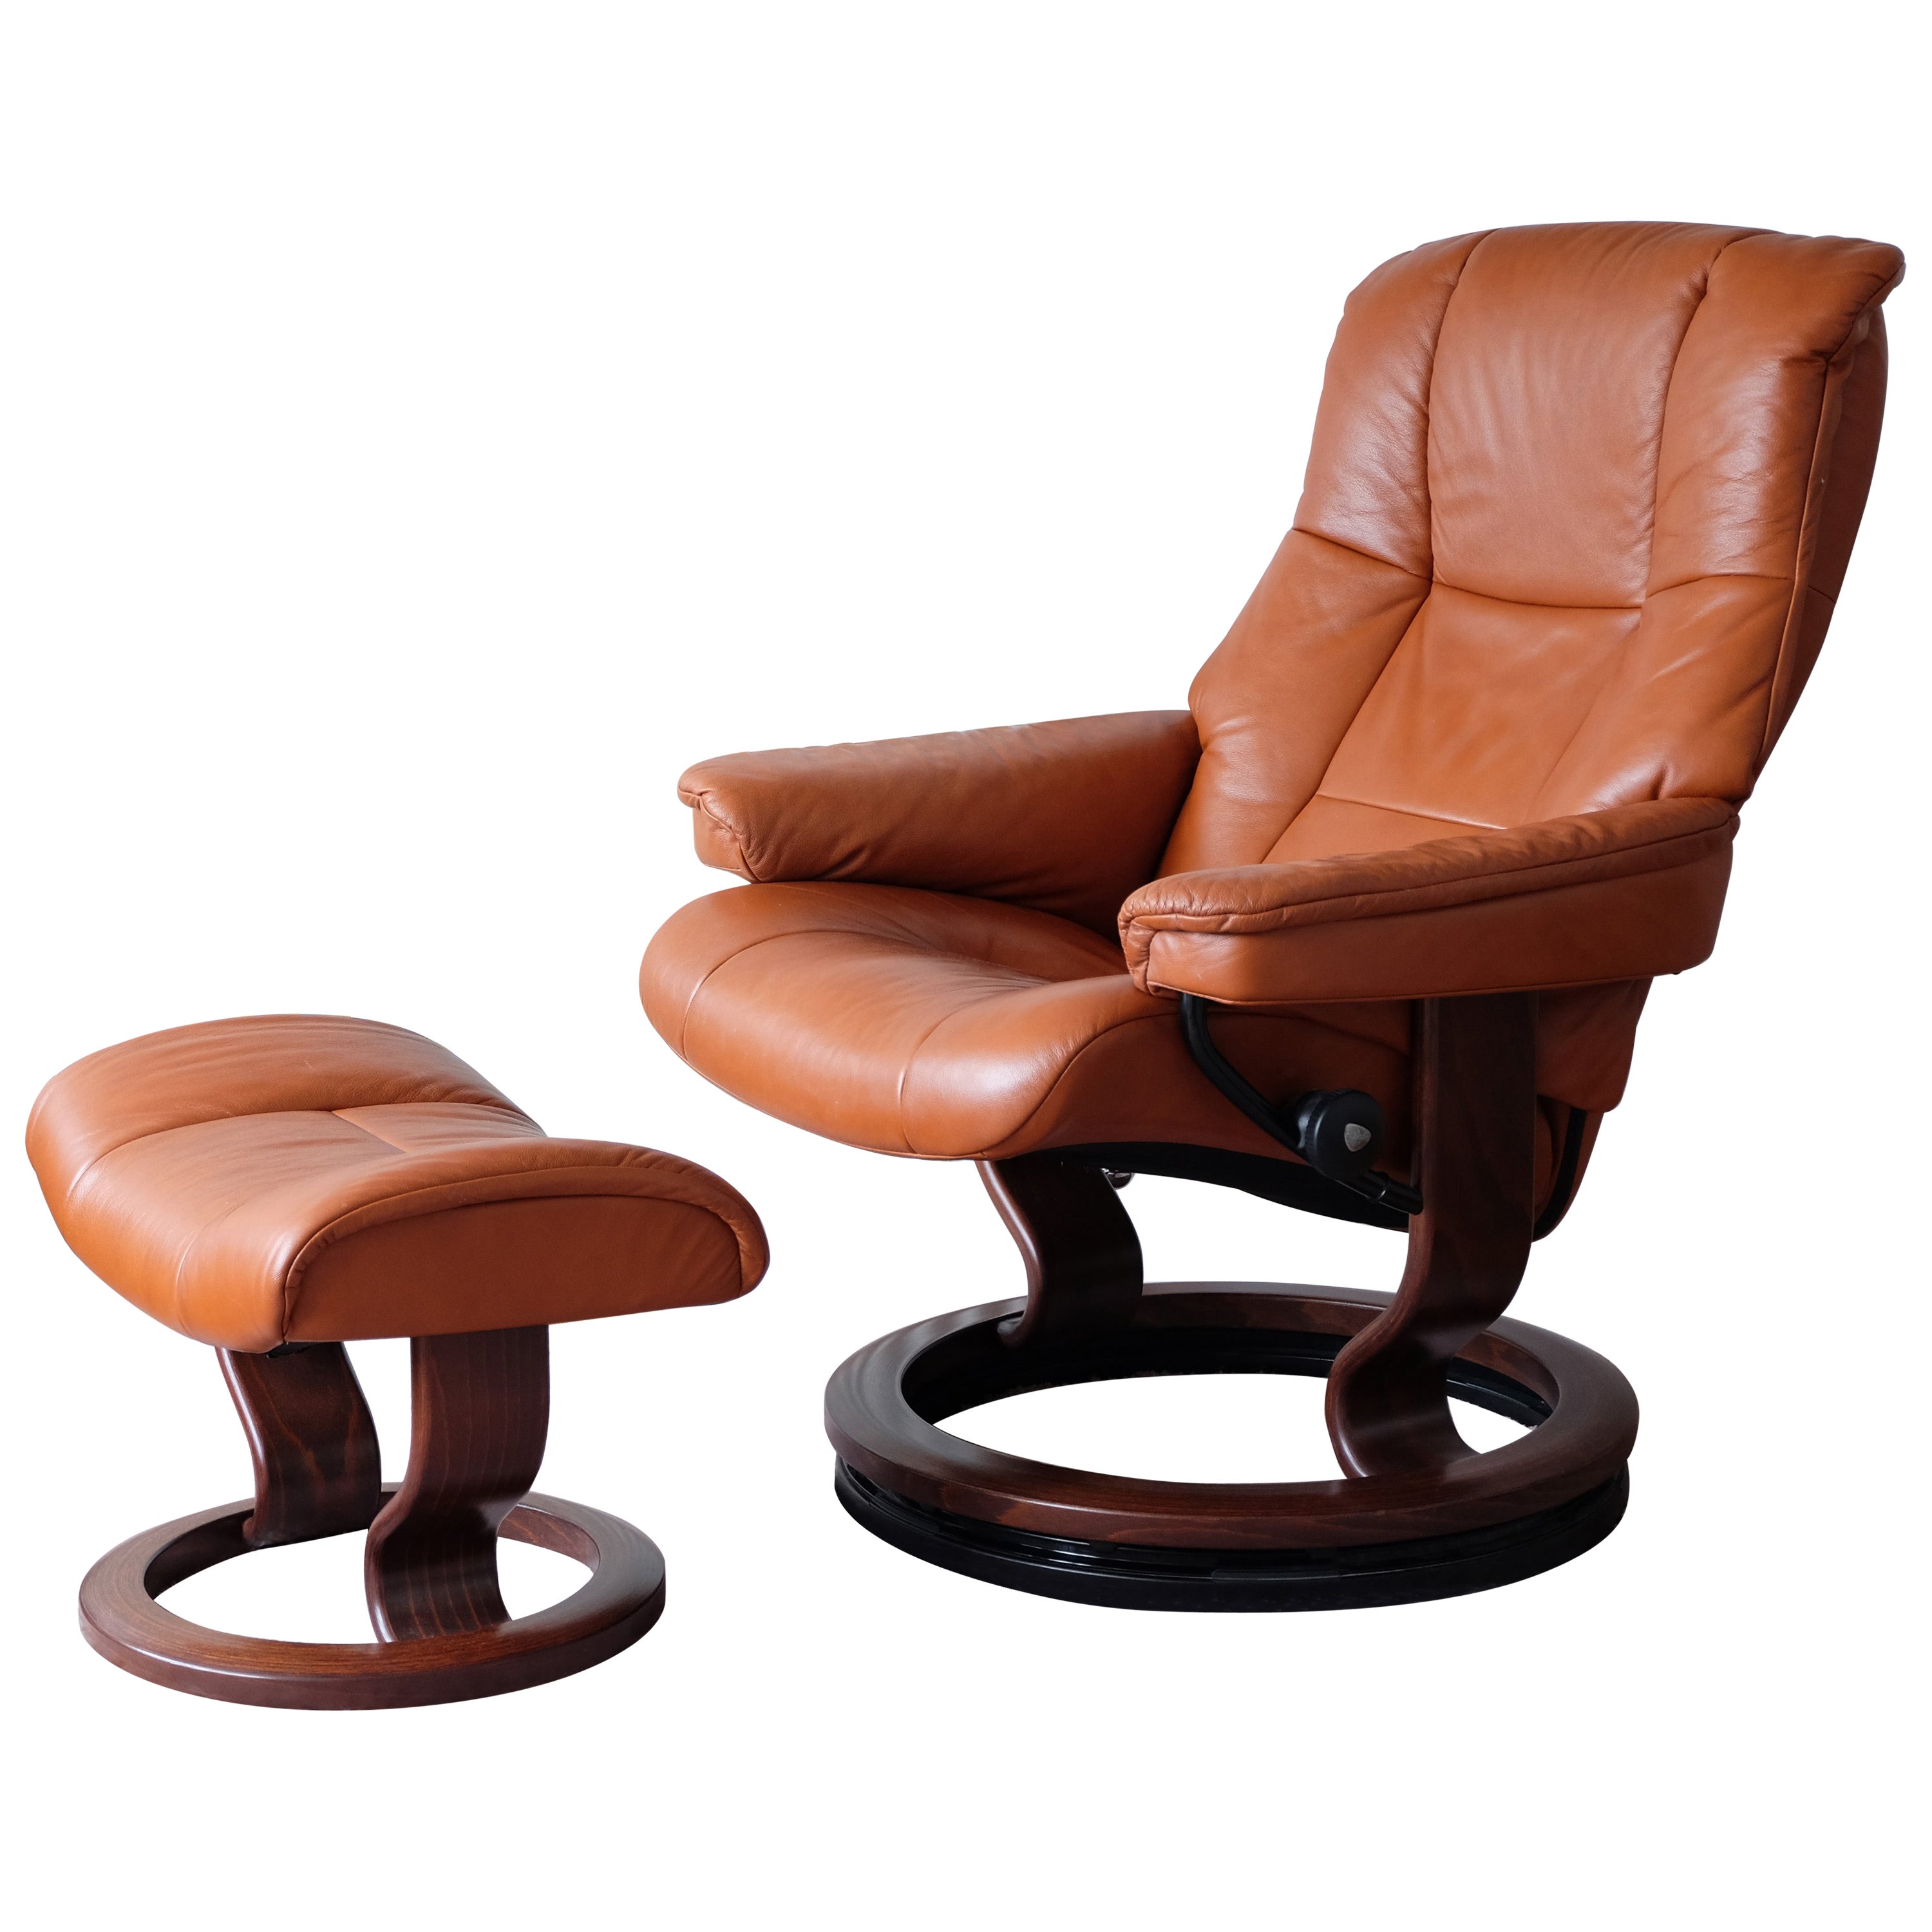 Mid-Century Modern Style Ekornes Stressless Tan Leather Recliner with Footstool